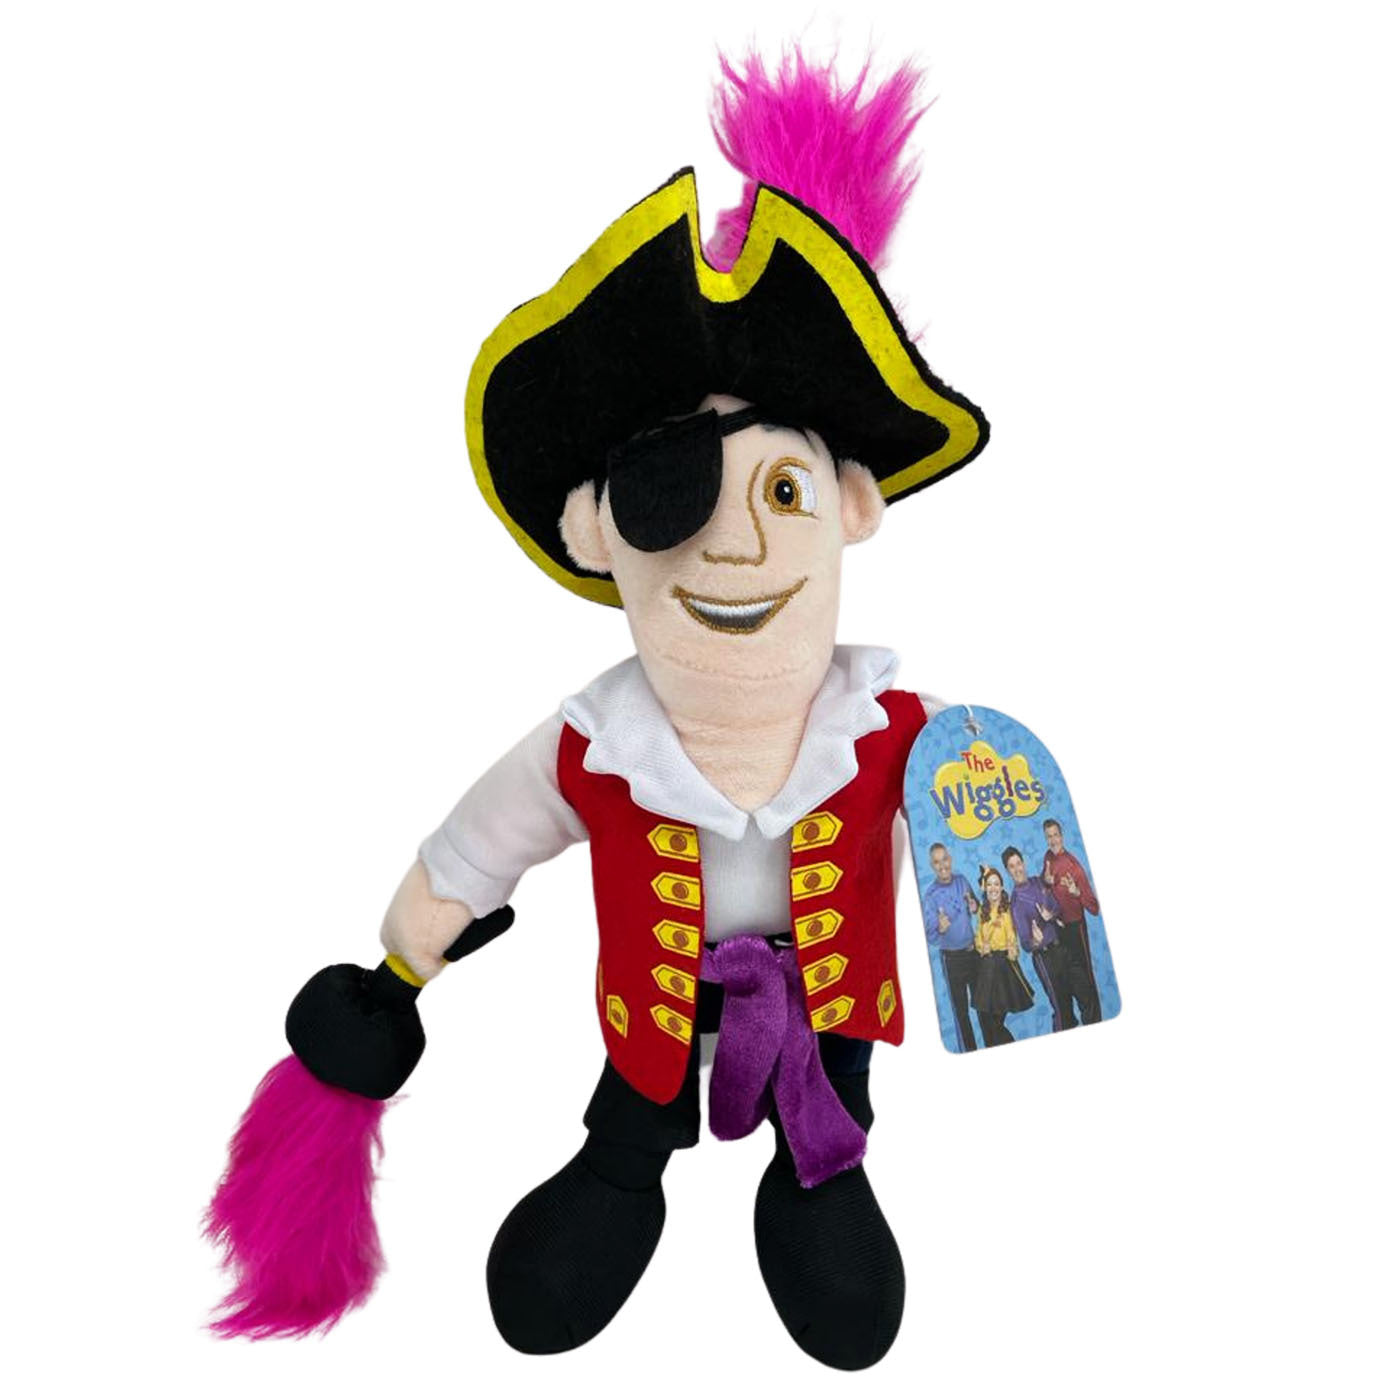 The Wiggles Plush - Captain Feathersword